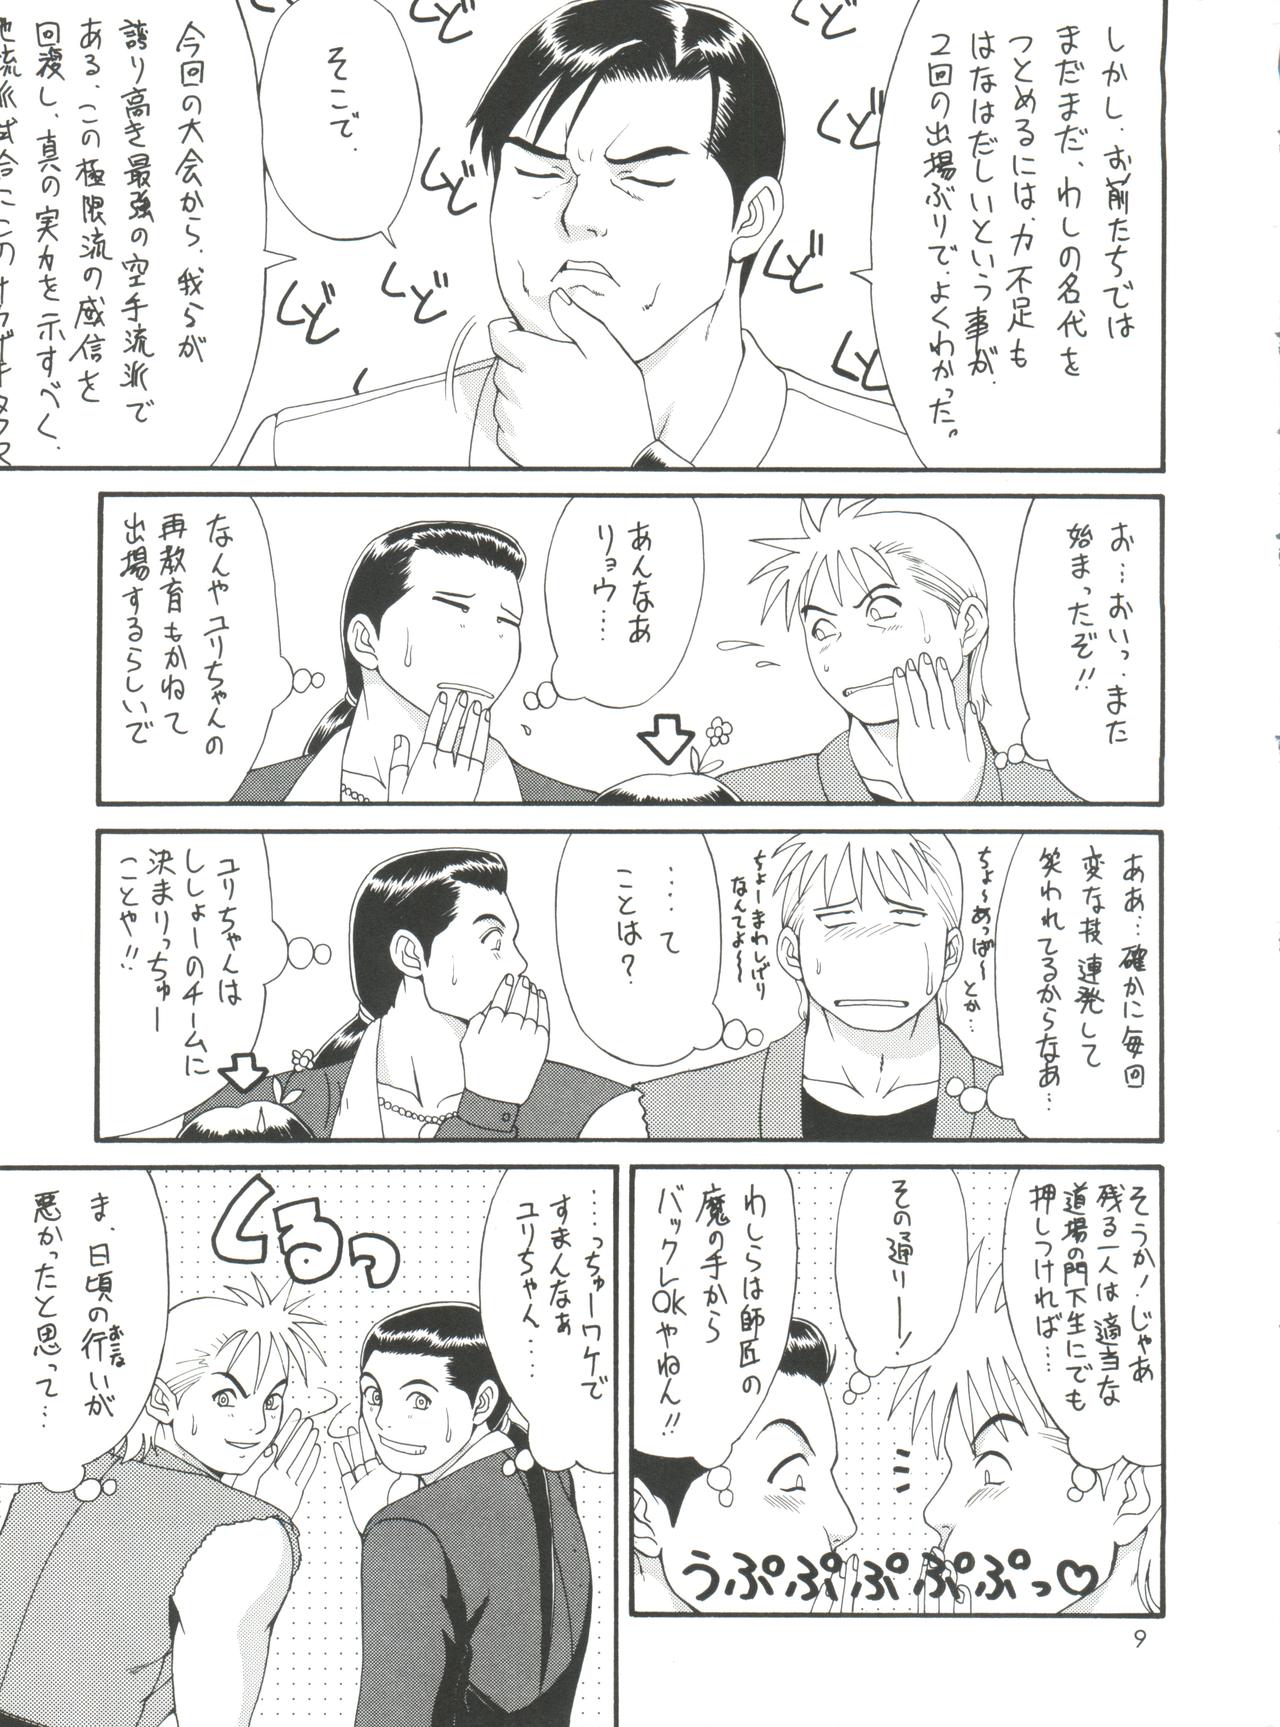 (CR24) [Saigado (Ishoku Dougen)] The Yuri & Friends '98 (King of Fighters) page 8 full